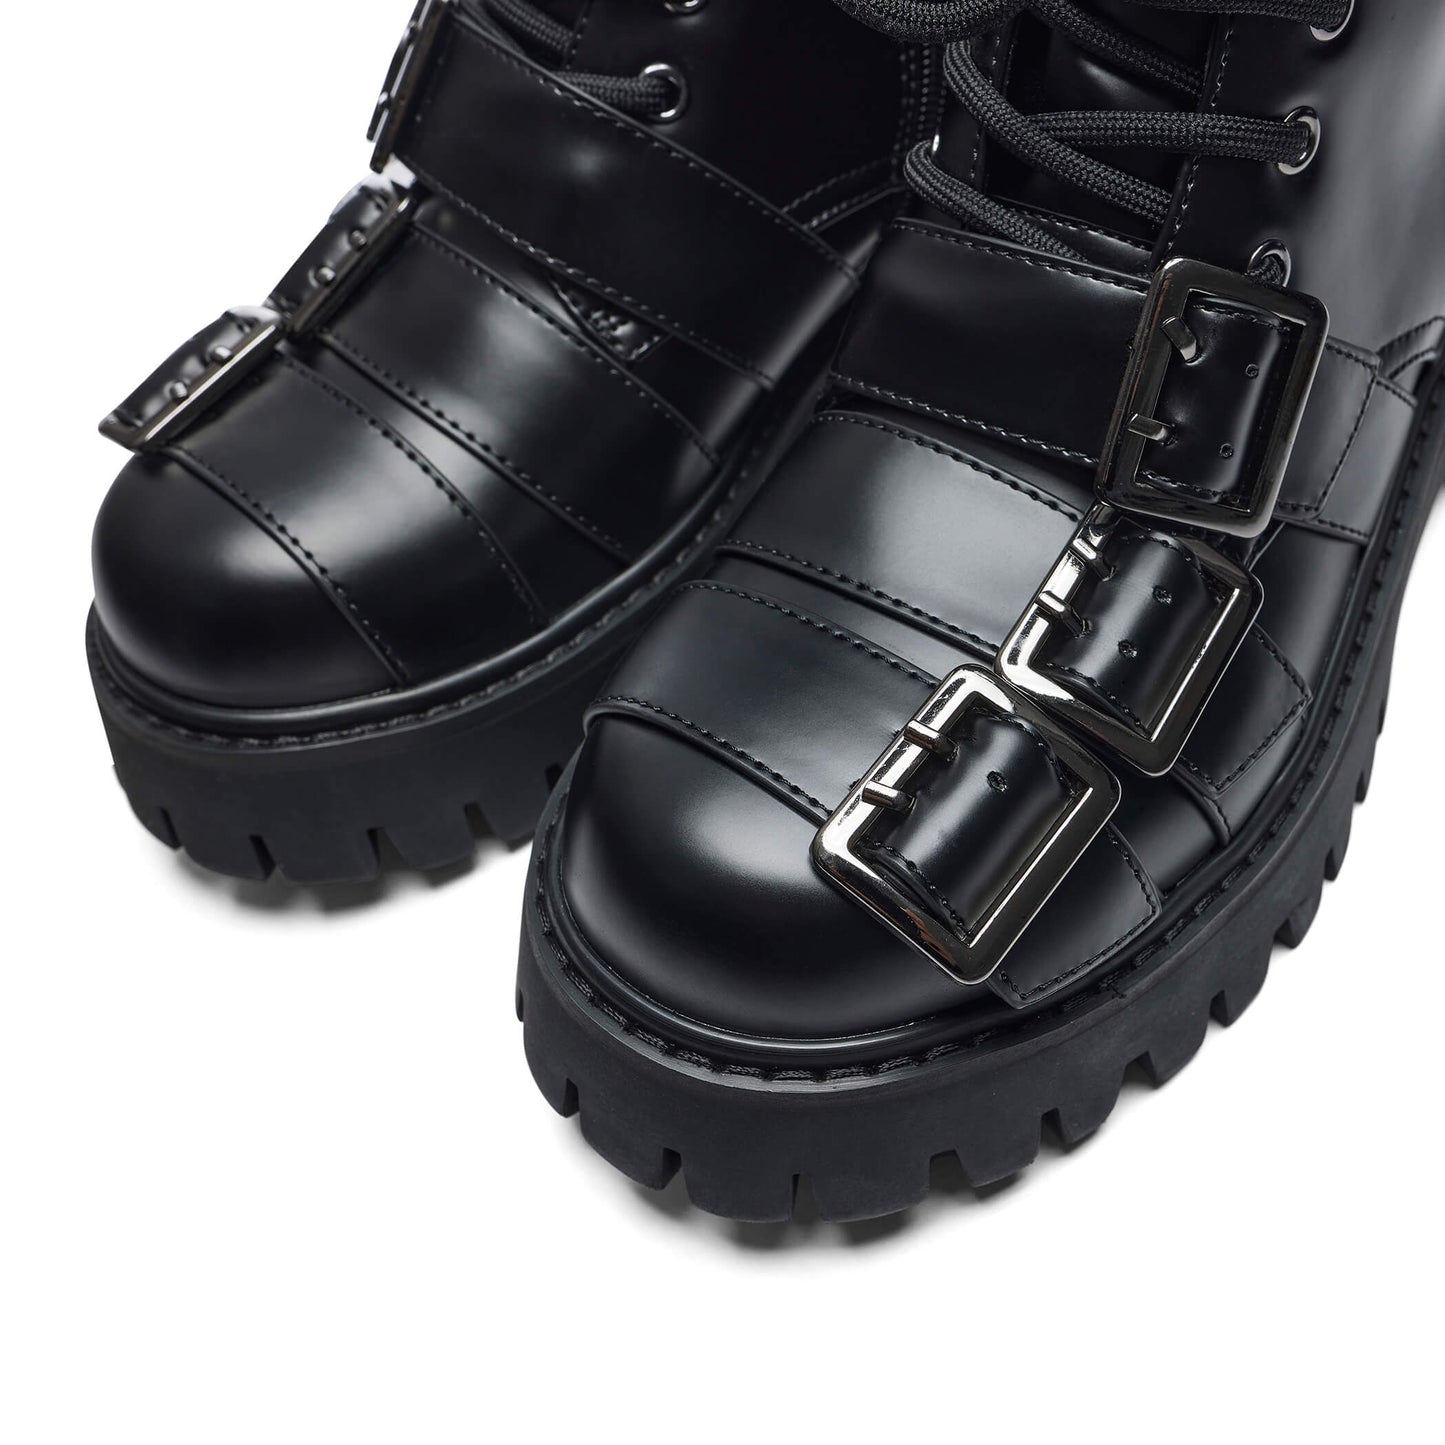 The Curse Of The Black Widow Boots - Black - Ankle Boots - KOI Footwear - Black - Front Detail View